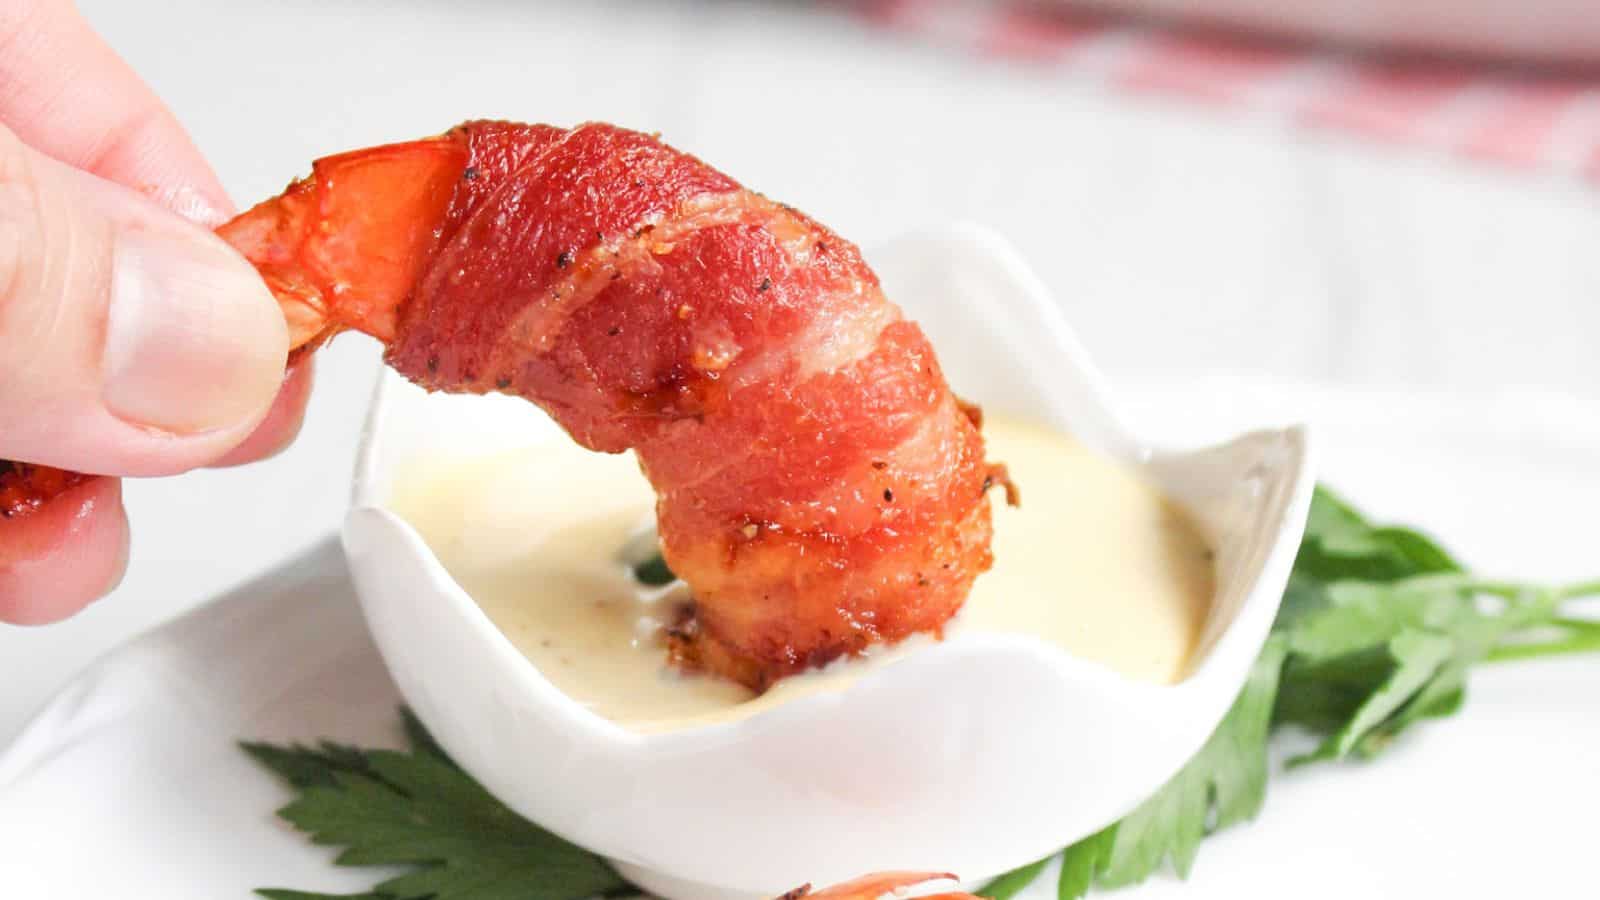 A hand holding a bacon-wrapped shrimp dipped into a small bowl of sauce, placed on a white surface with green herbs.